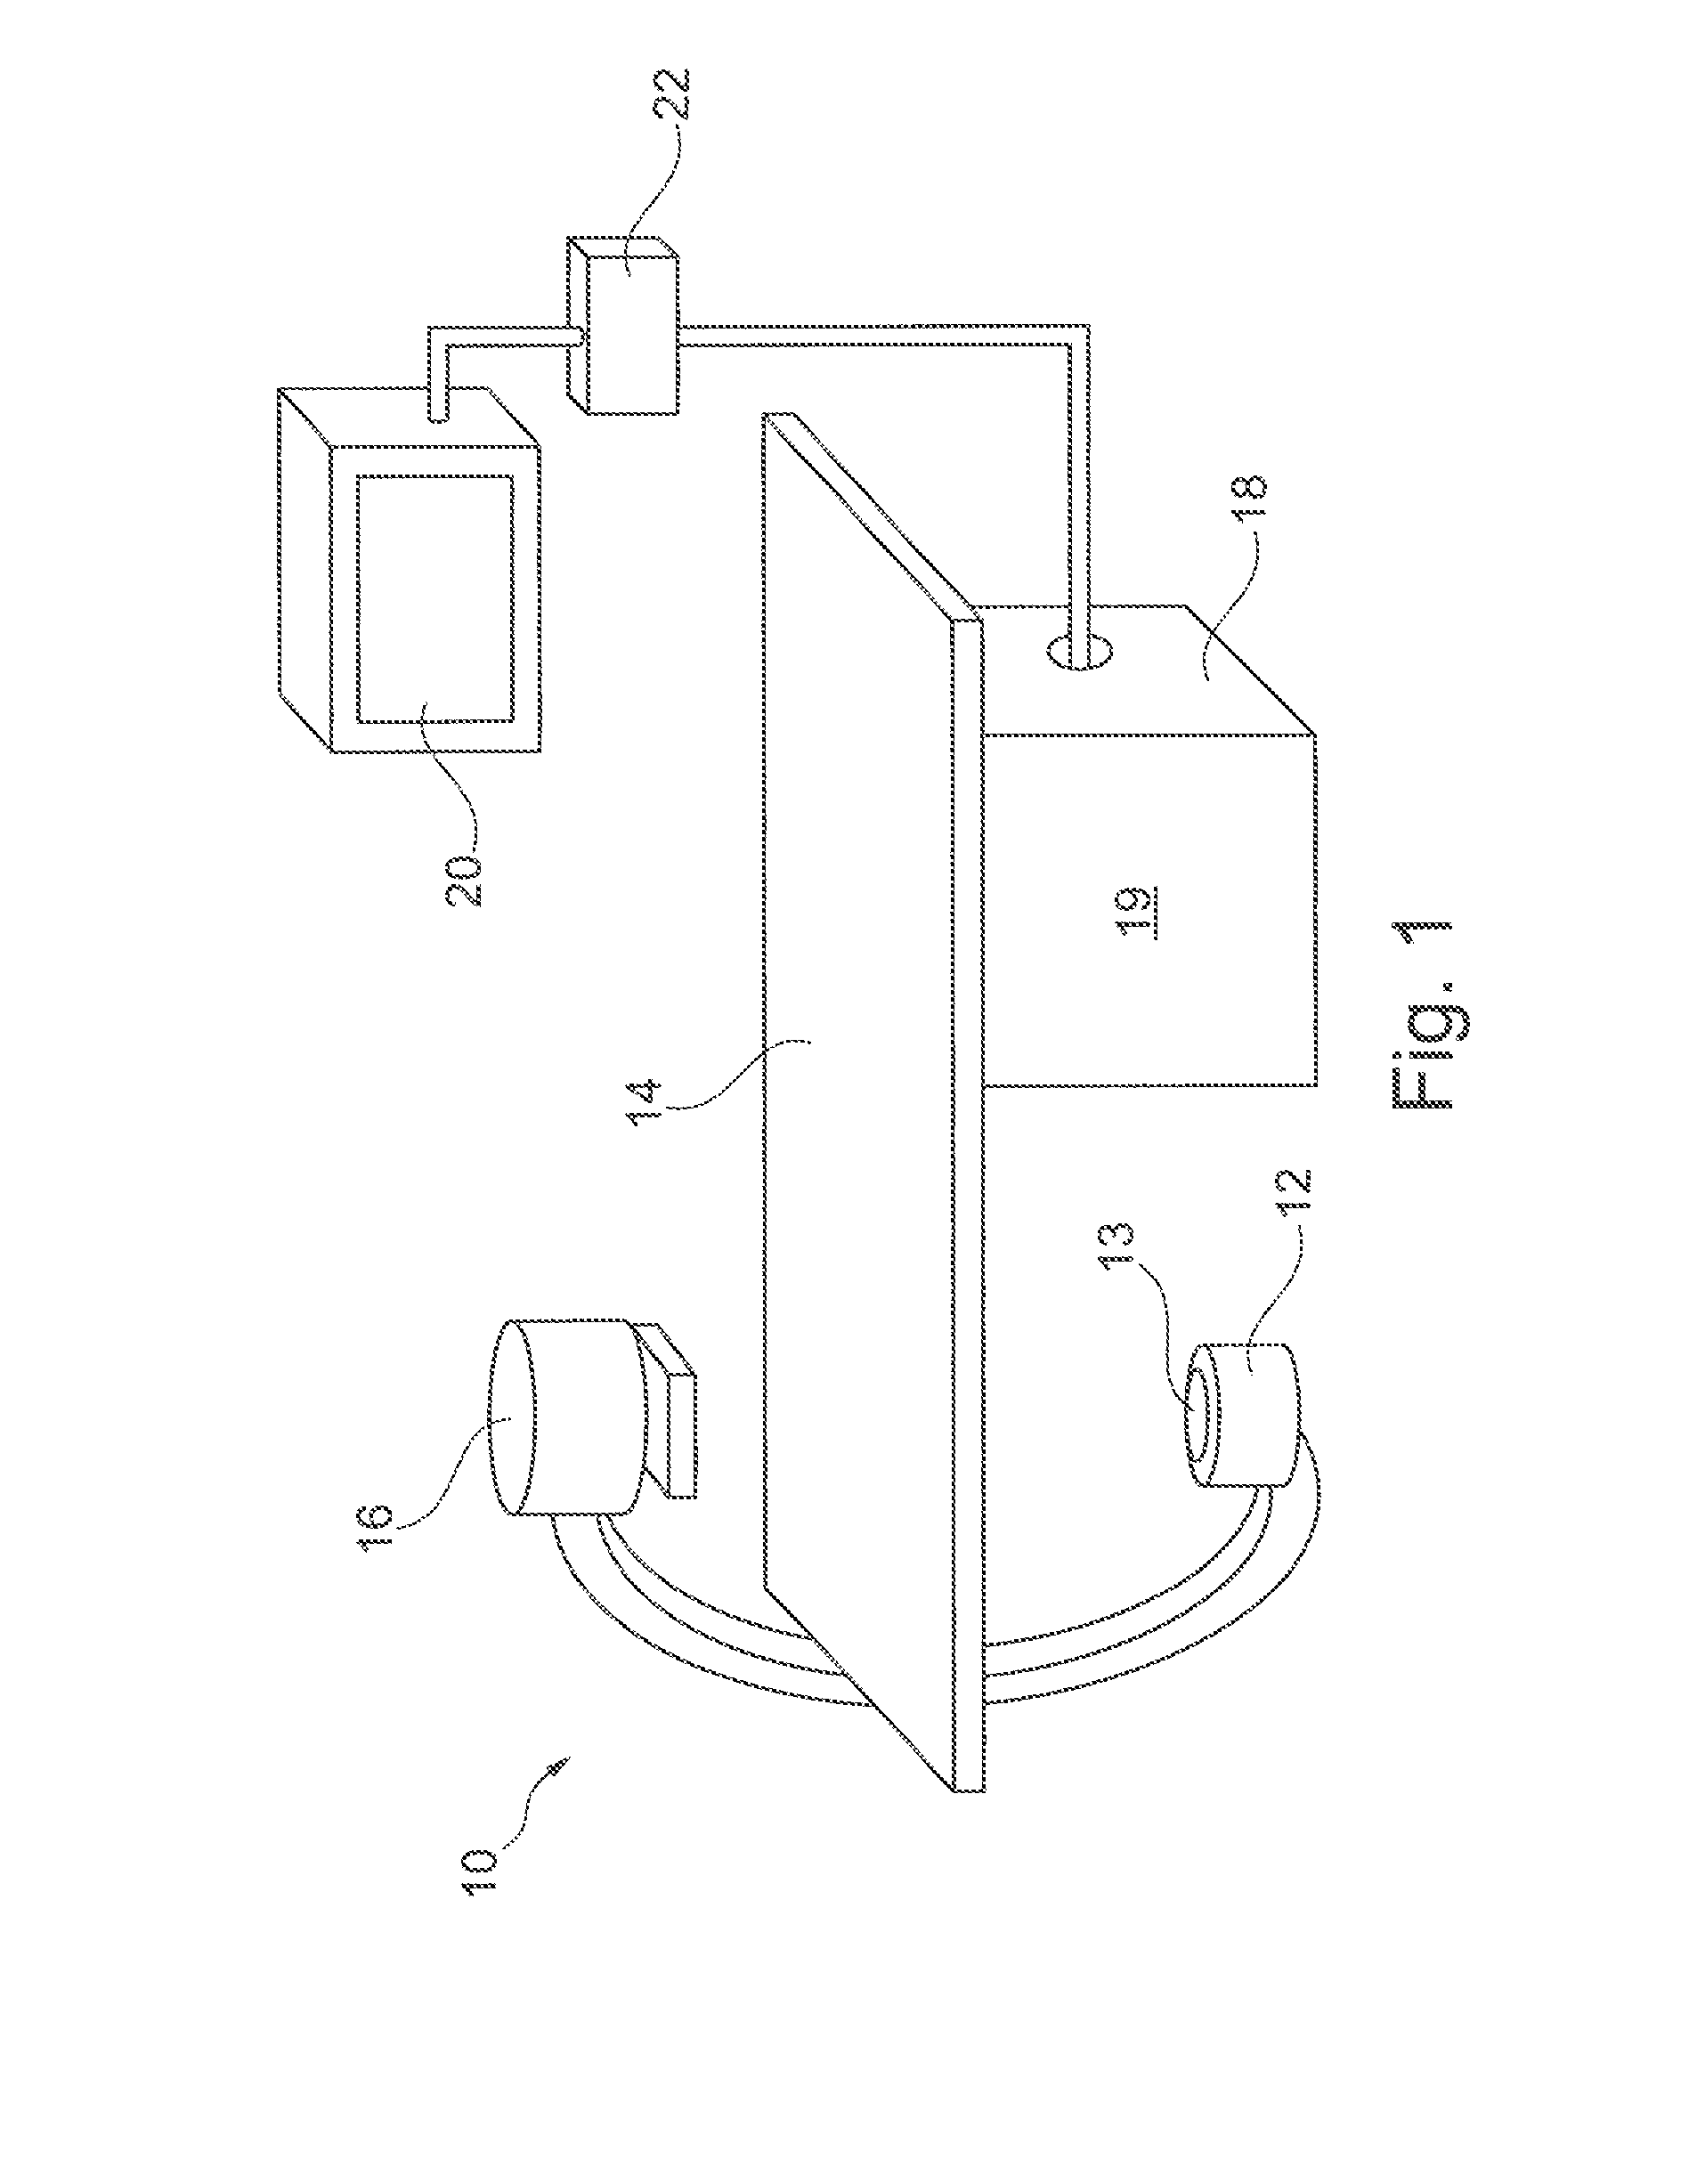 Medical imaging device for providing an image representation supporting in positioning an intervention device